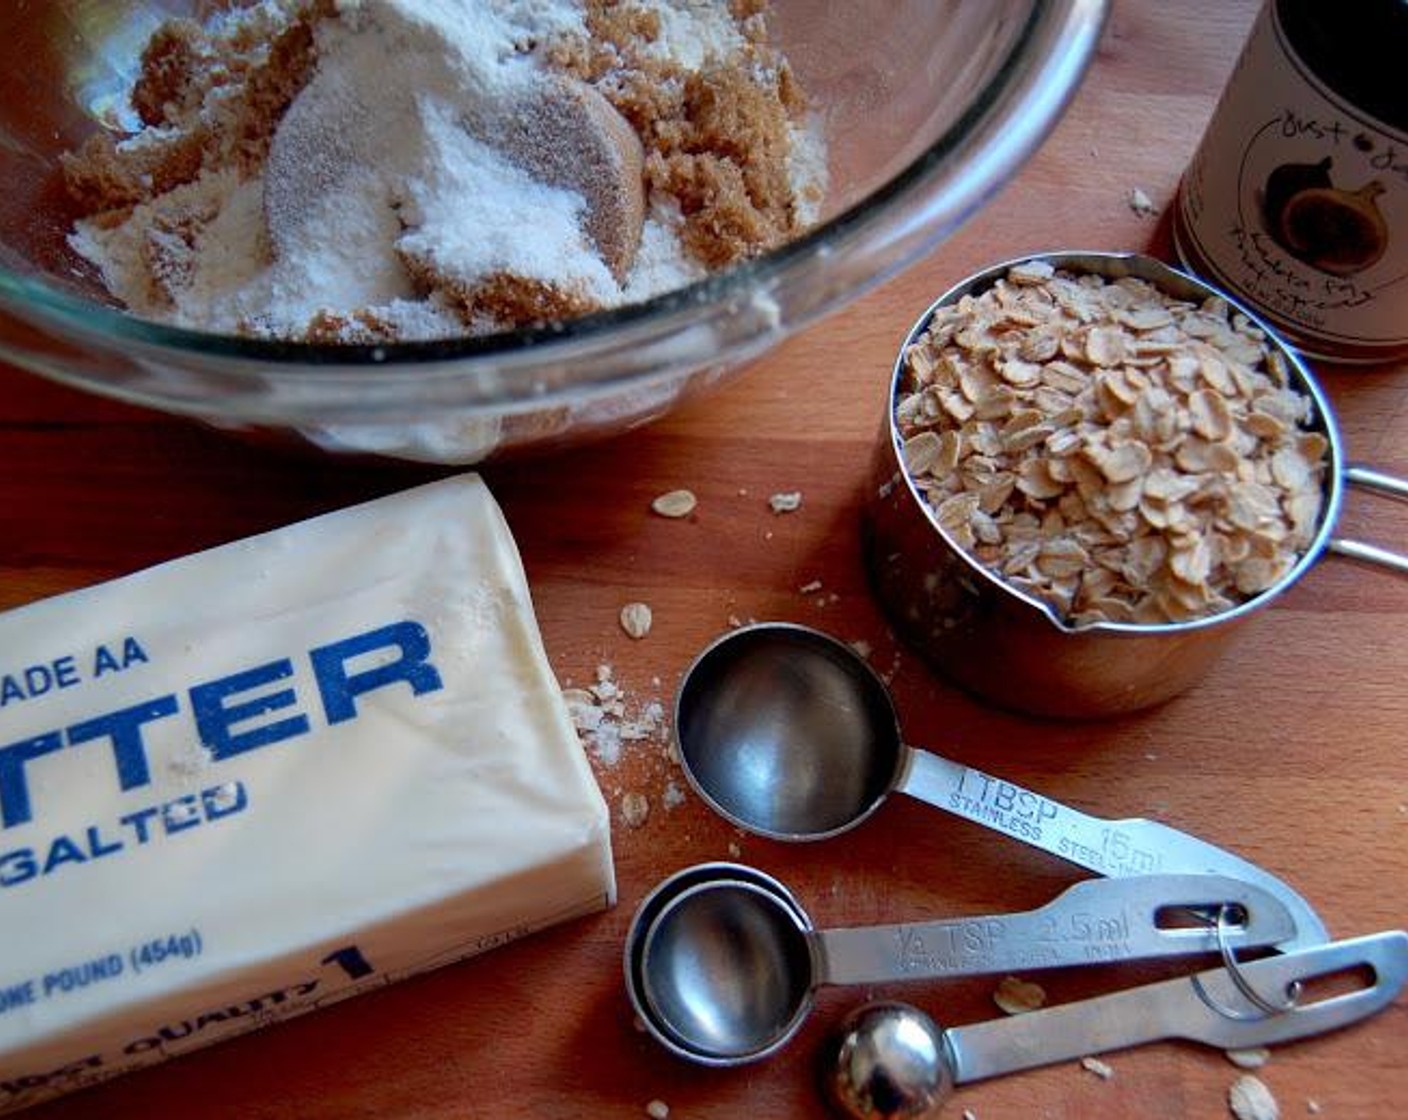 step 2 In a medium size bowl, mix together the All-Purpose Flour (1 1/2 cups), Baking Powder (1 tsp), Salt (1/4 tsp), Raw Old Fashioned Rolled Oats (2 cups), and Brown Sugar (1 cup)  Stir together to mix the dry ingredients.